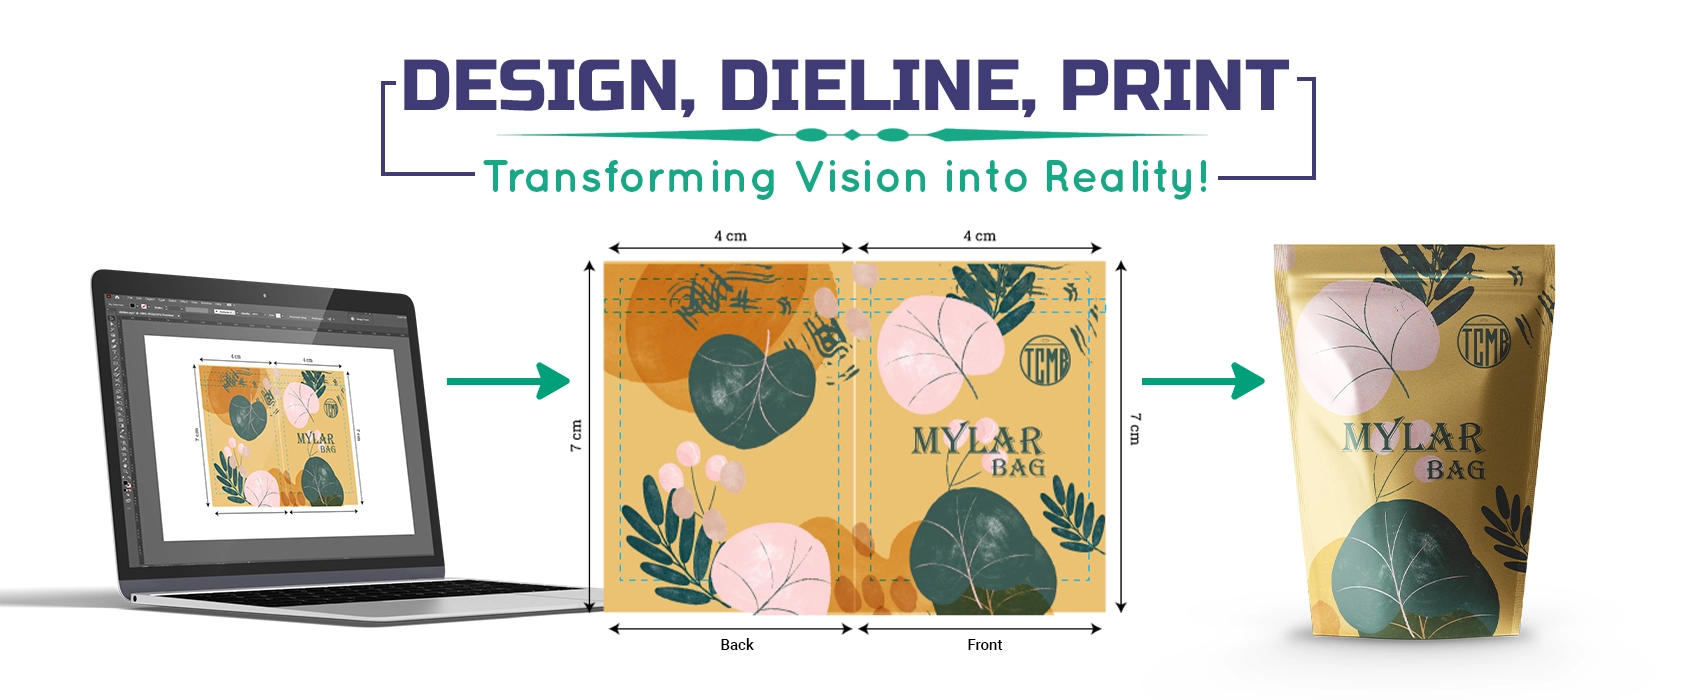 Design, Dieline, Print: Transforming vision into reality. Text with dimensions refers to a Mylar bag with front and back sides.